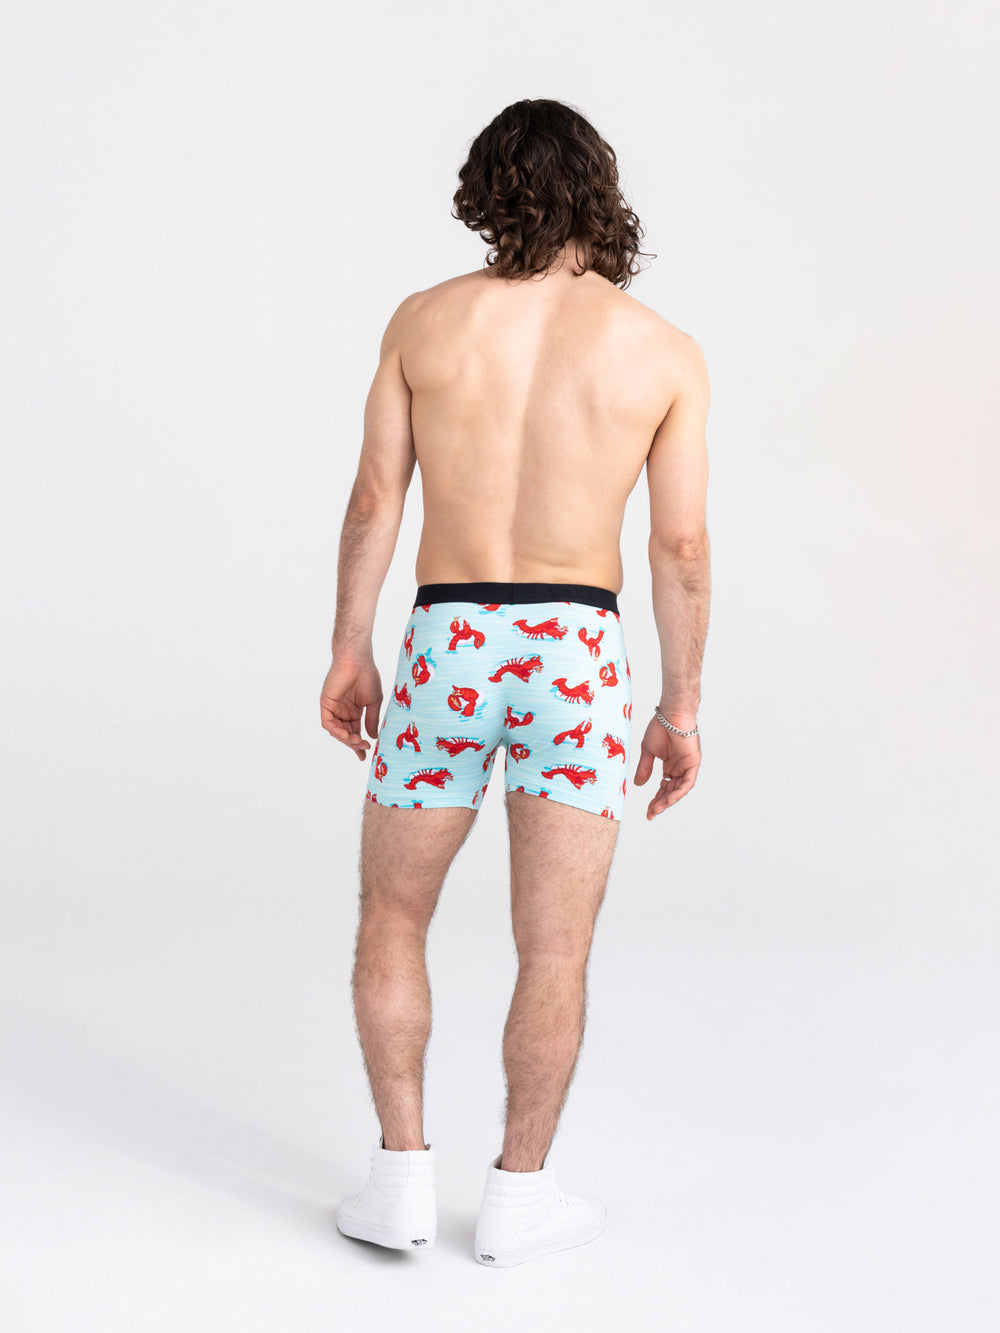 SAXX ULTRA BOXER BRIEF- LOBSTER LOUNGE  - CLEARANCE